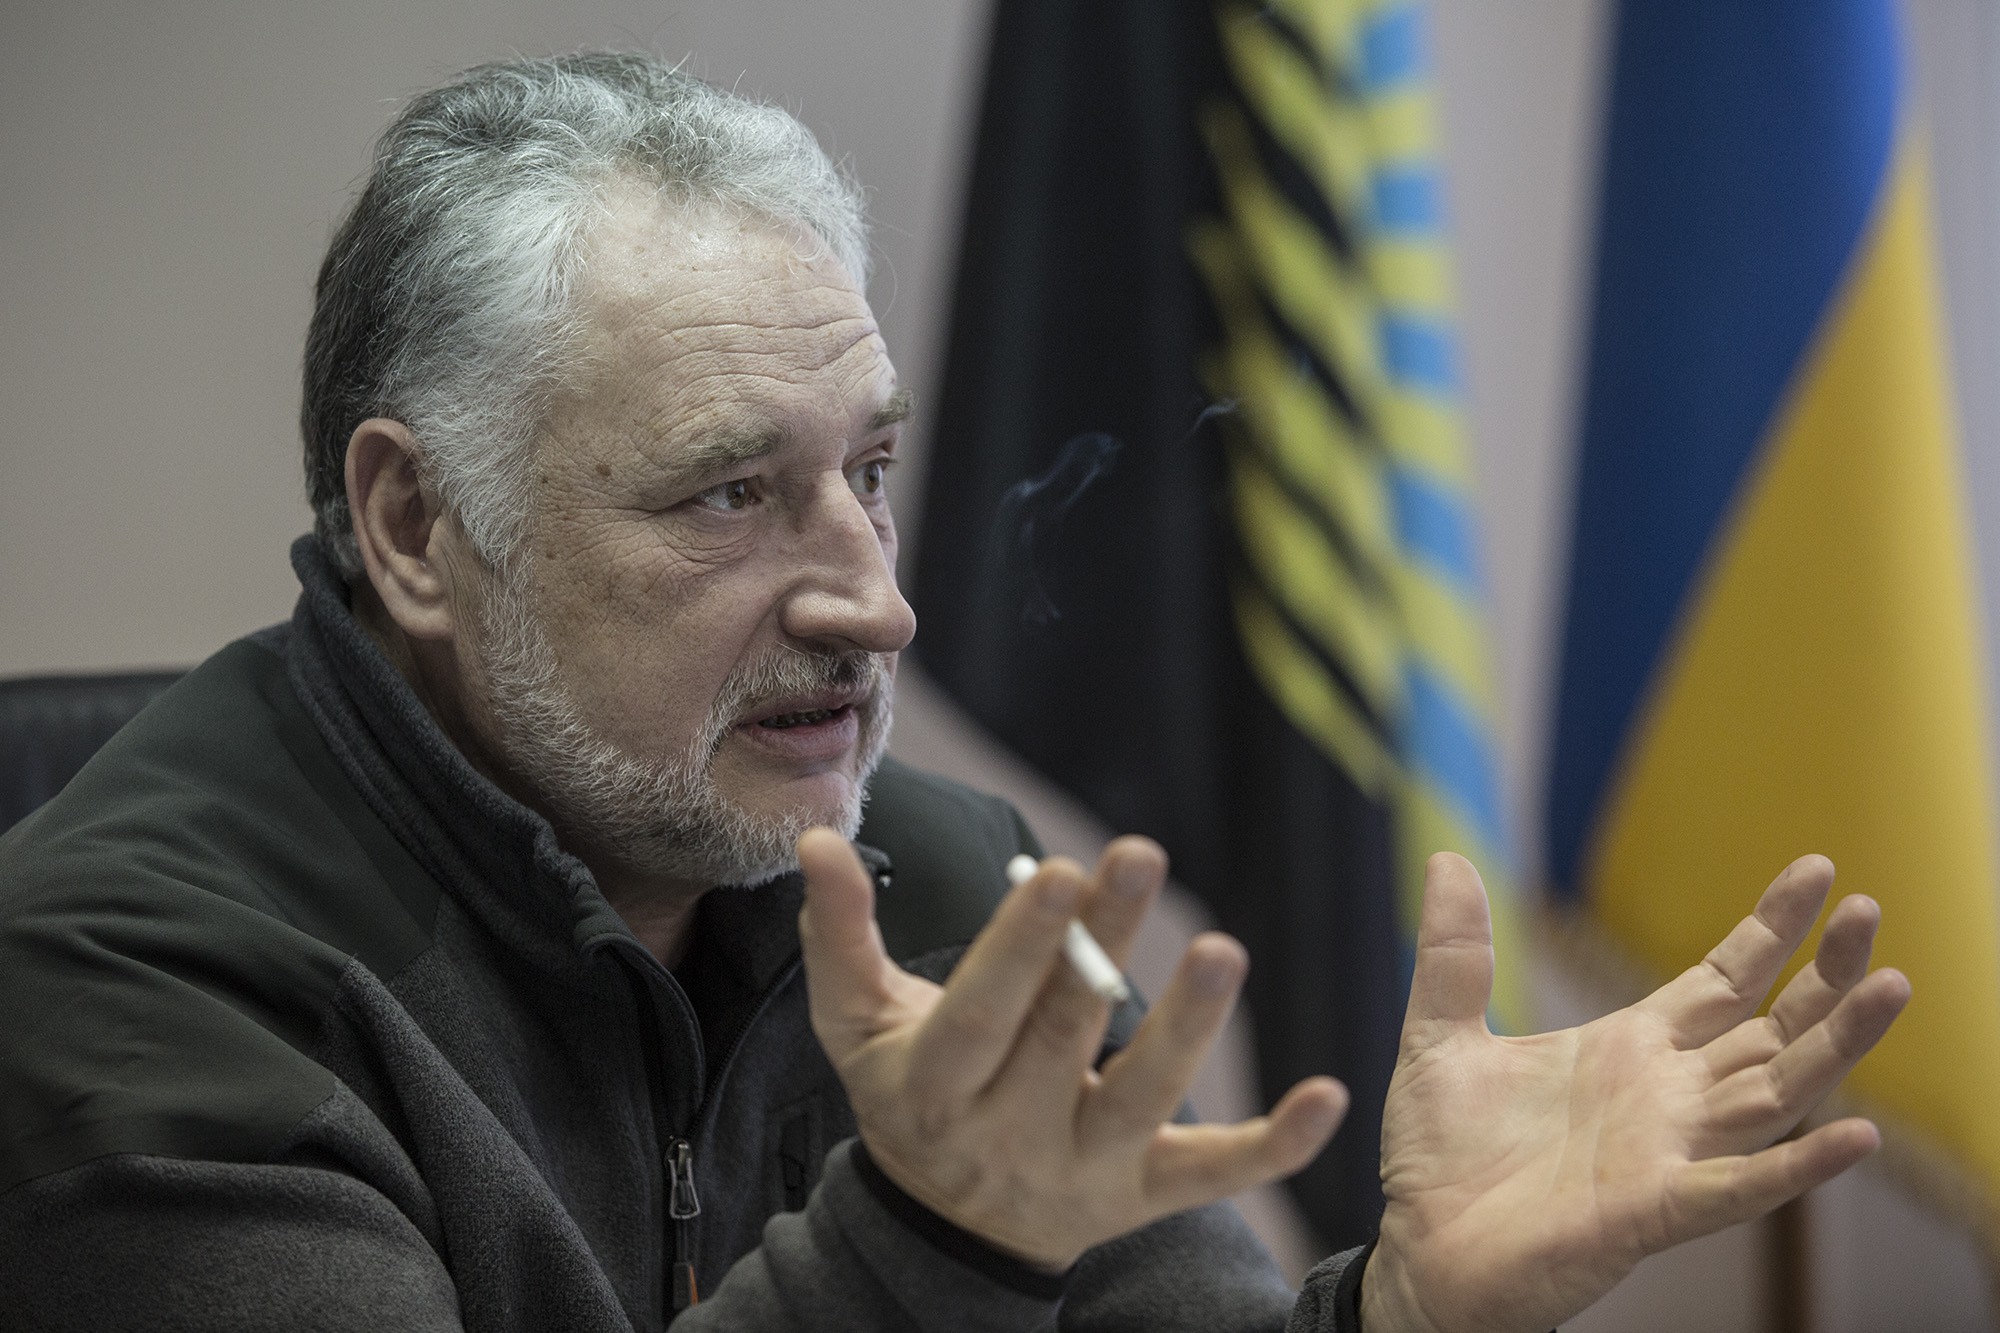 Donetsk Oblast governor attempts to bring change to war-torn region - Kyiv Post